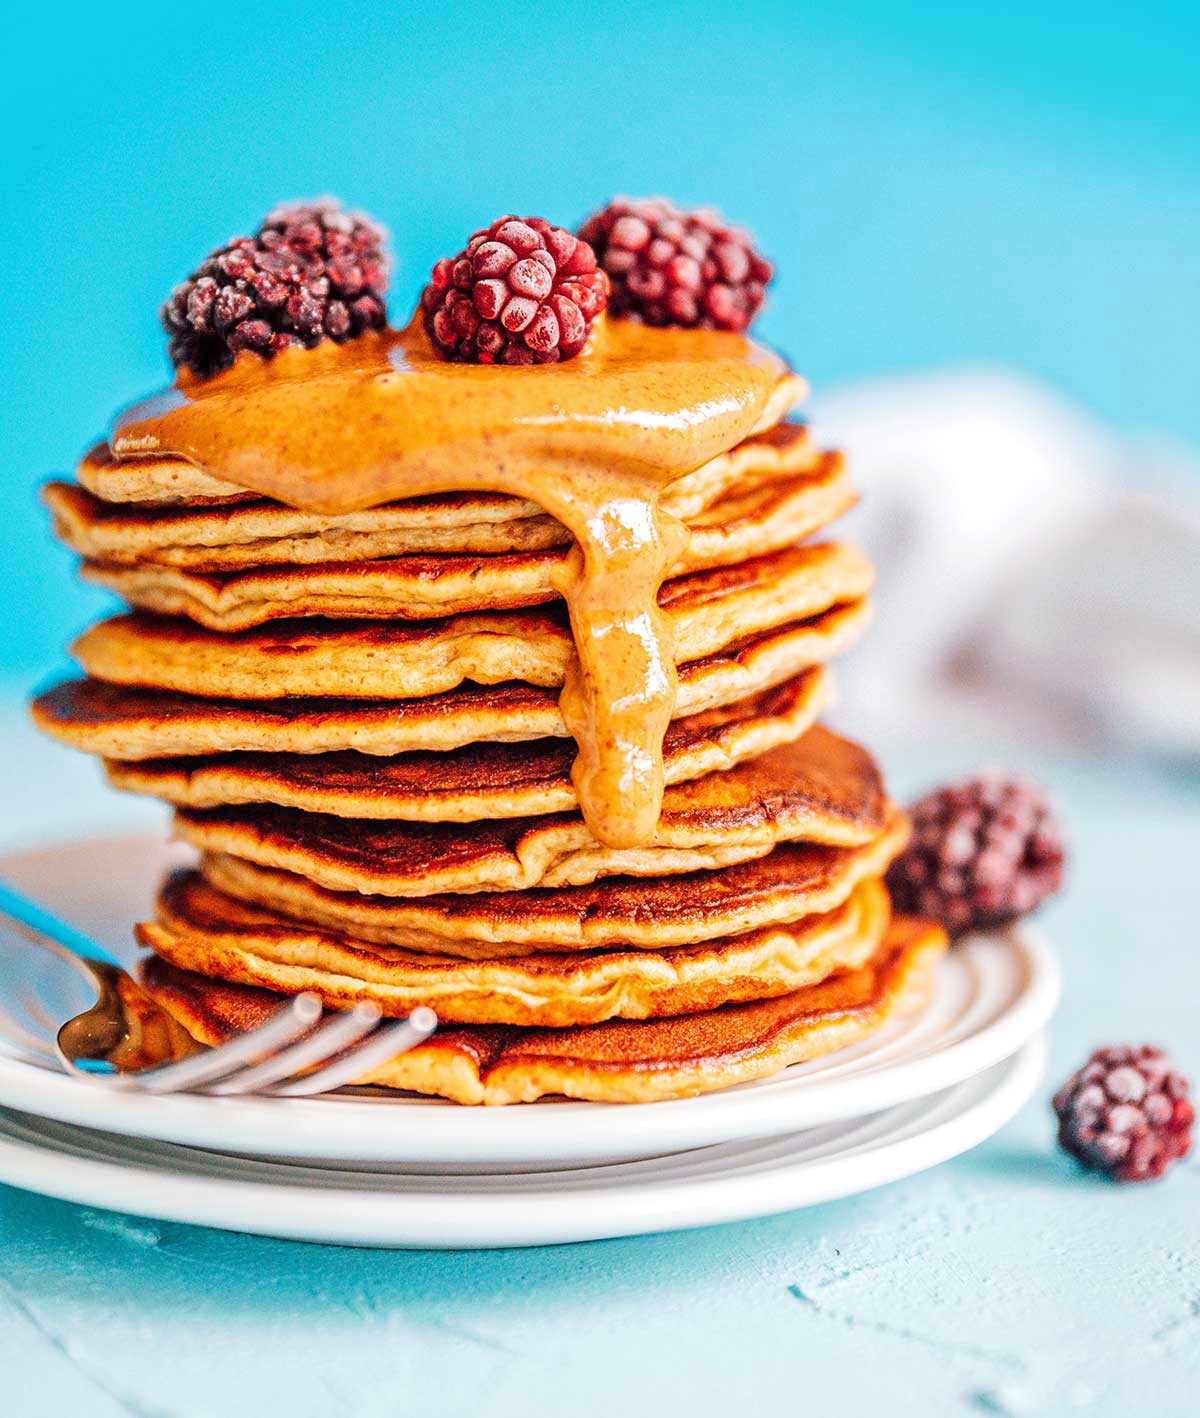 Paleo pancakes with almond butter and berries on a blue background